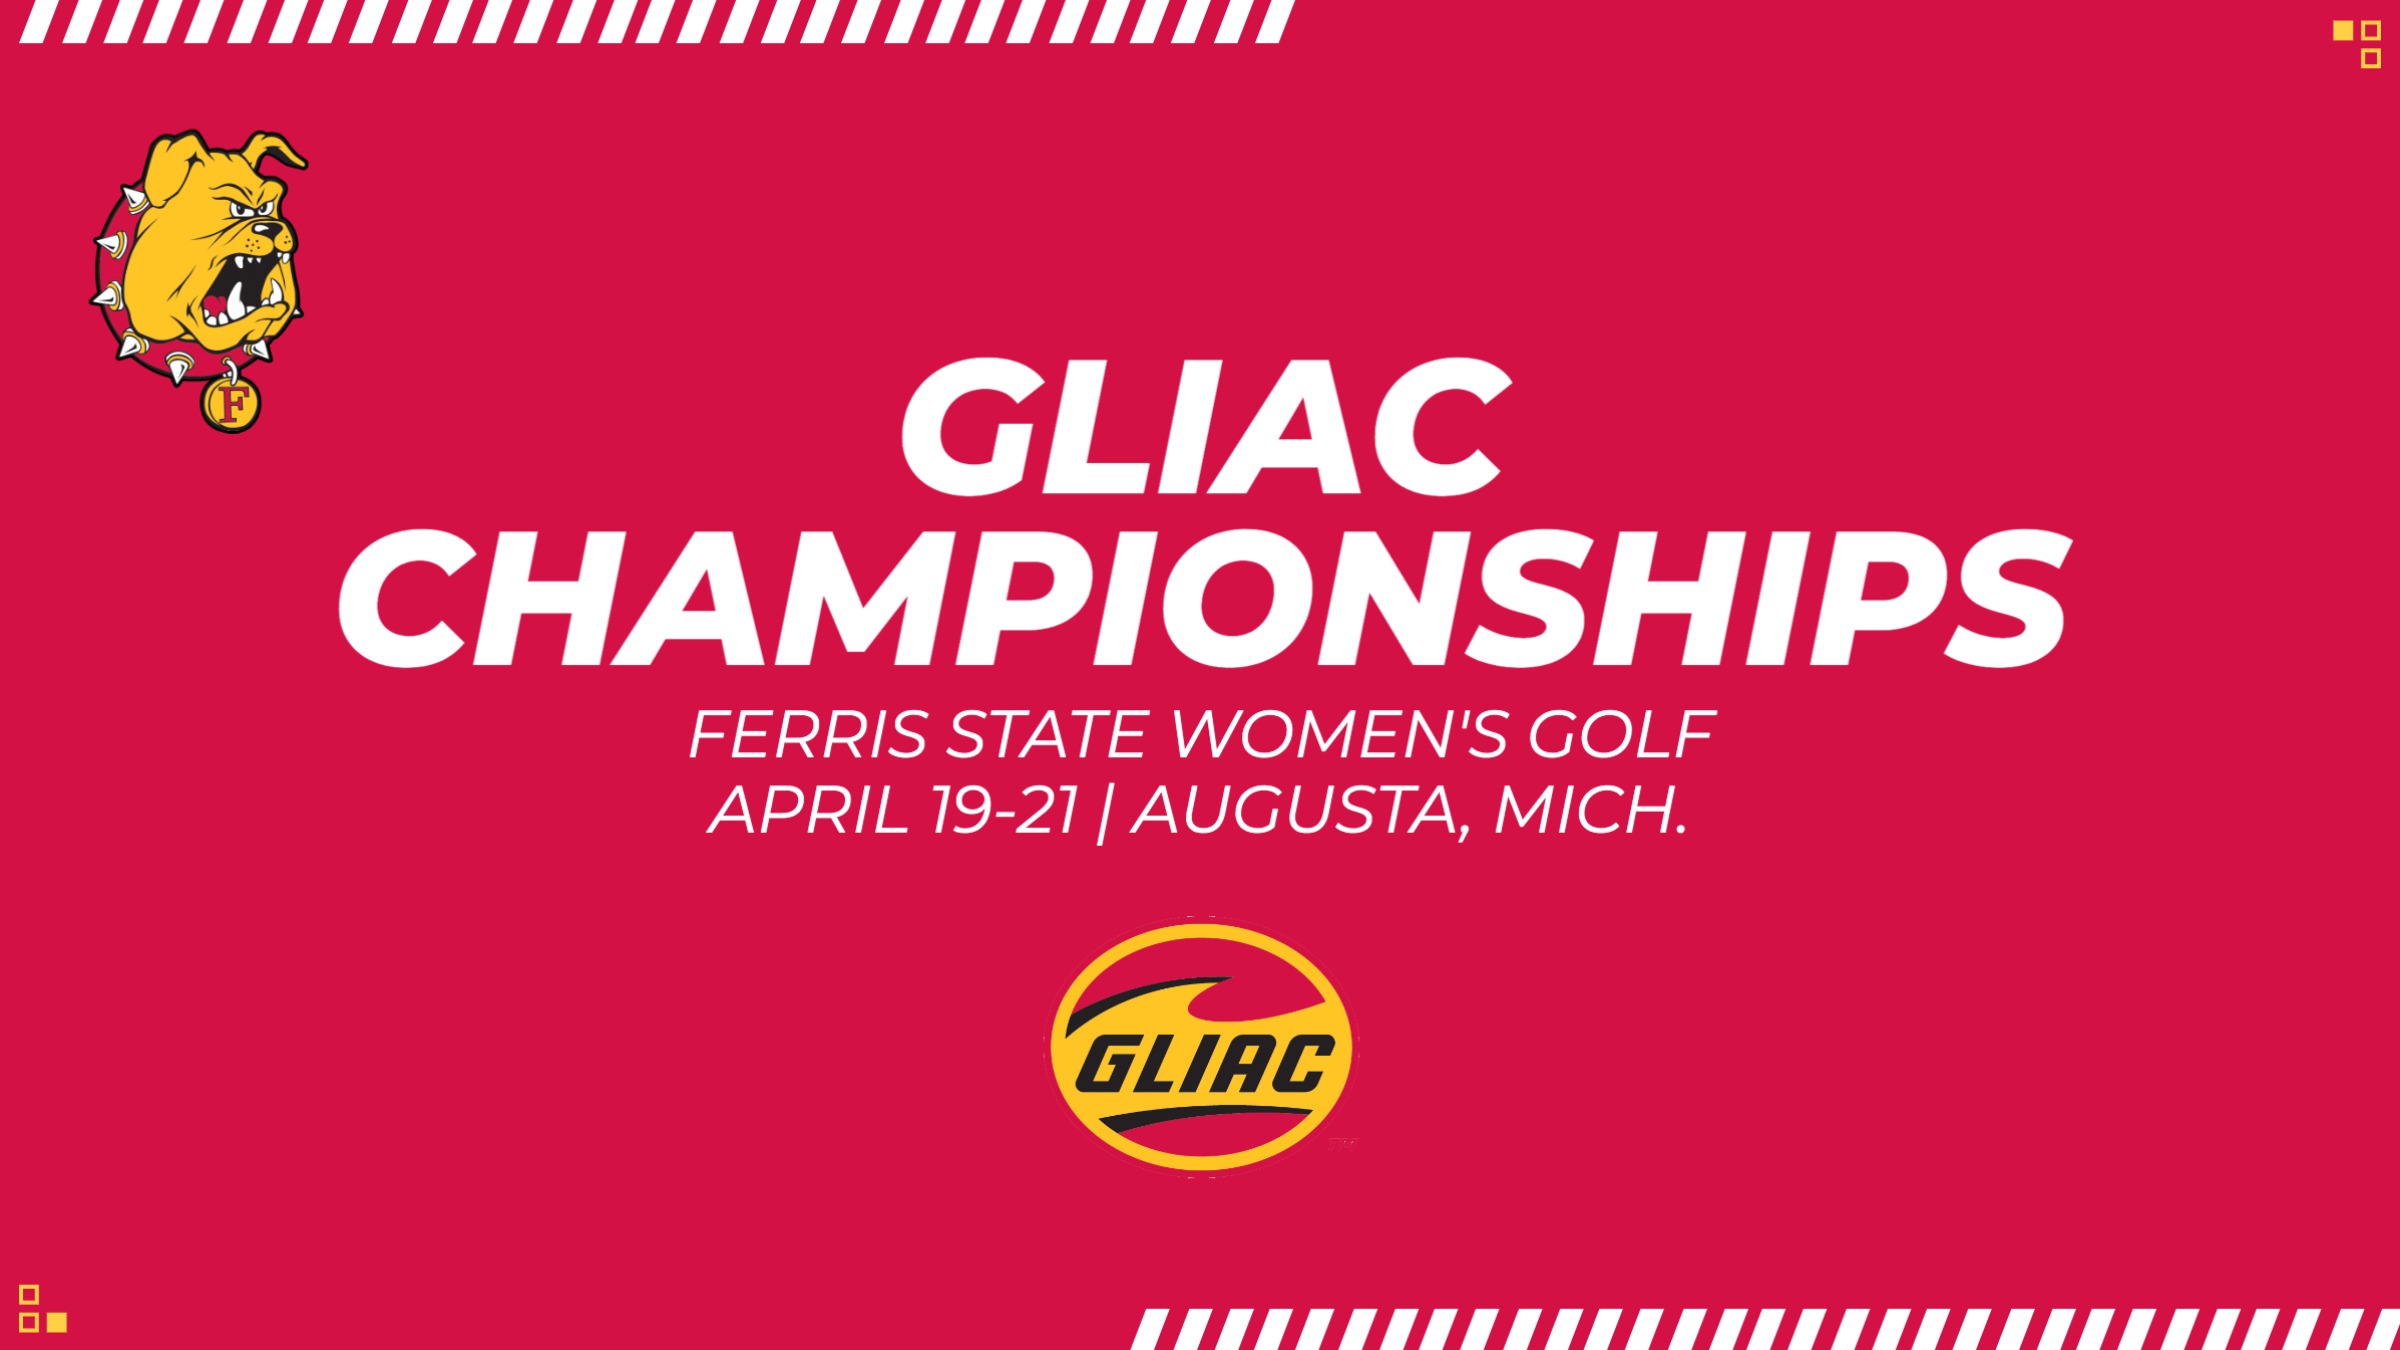 Ferris State Women's Golf Looks To Defend League Crown At GLIAC Championships This Weekend